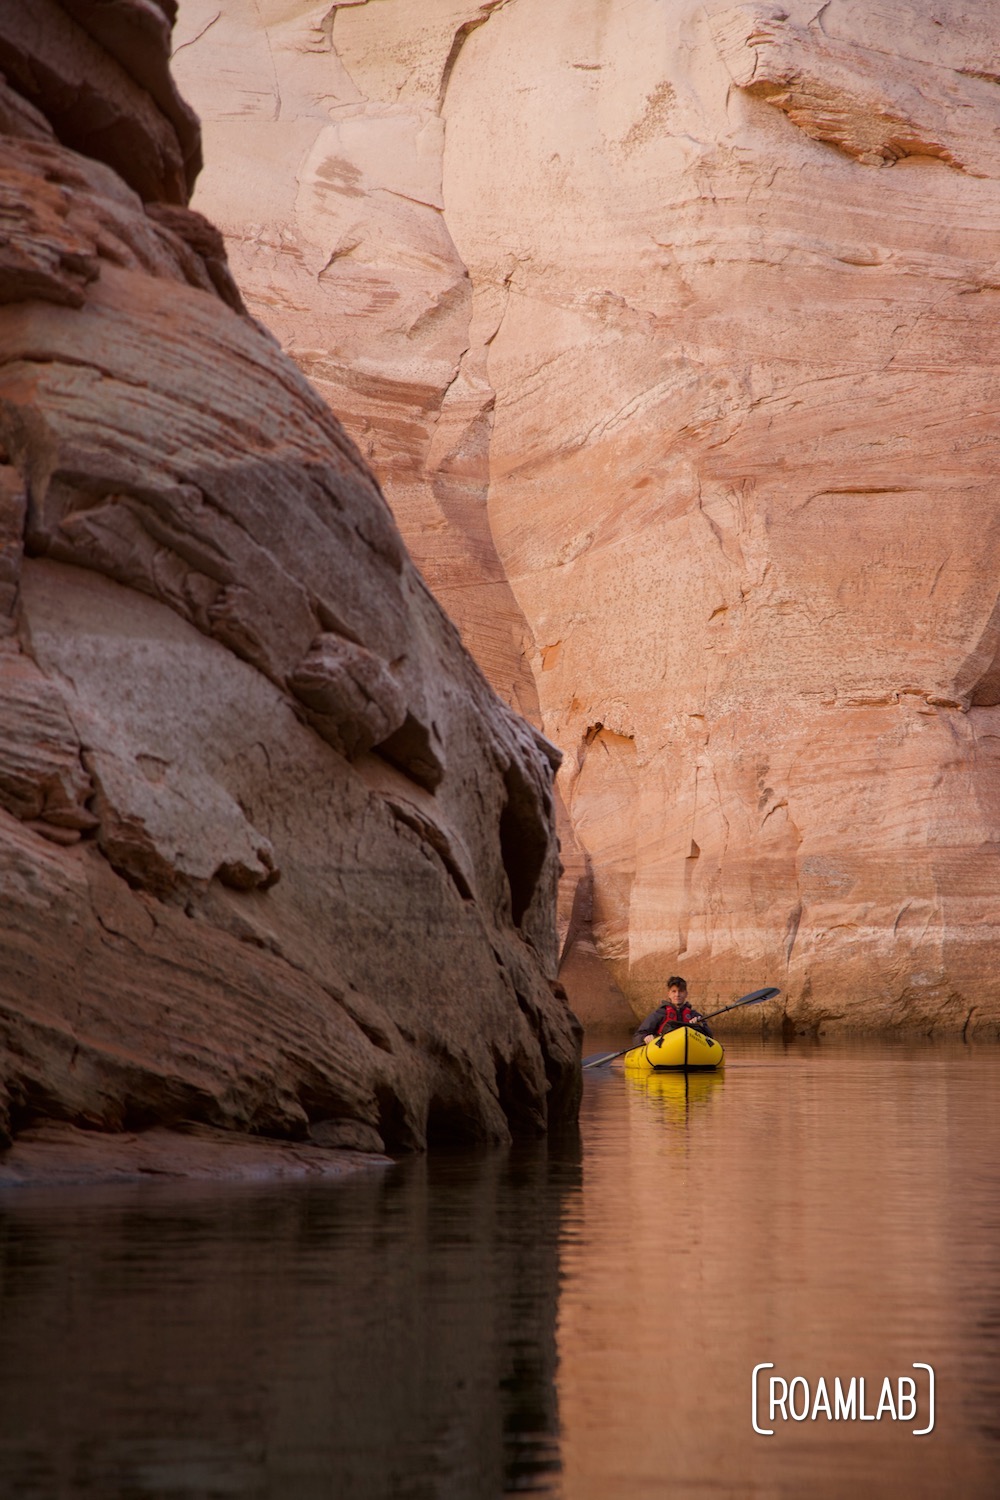 Man in a yellow raft paddling around a corner of pink sandstone cliffs in Antelope Canyon off Lake Powell in Norther Arizona.